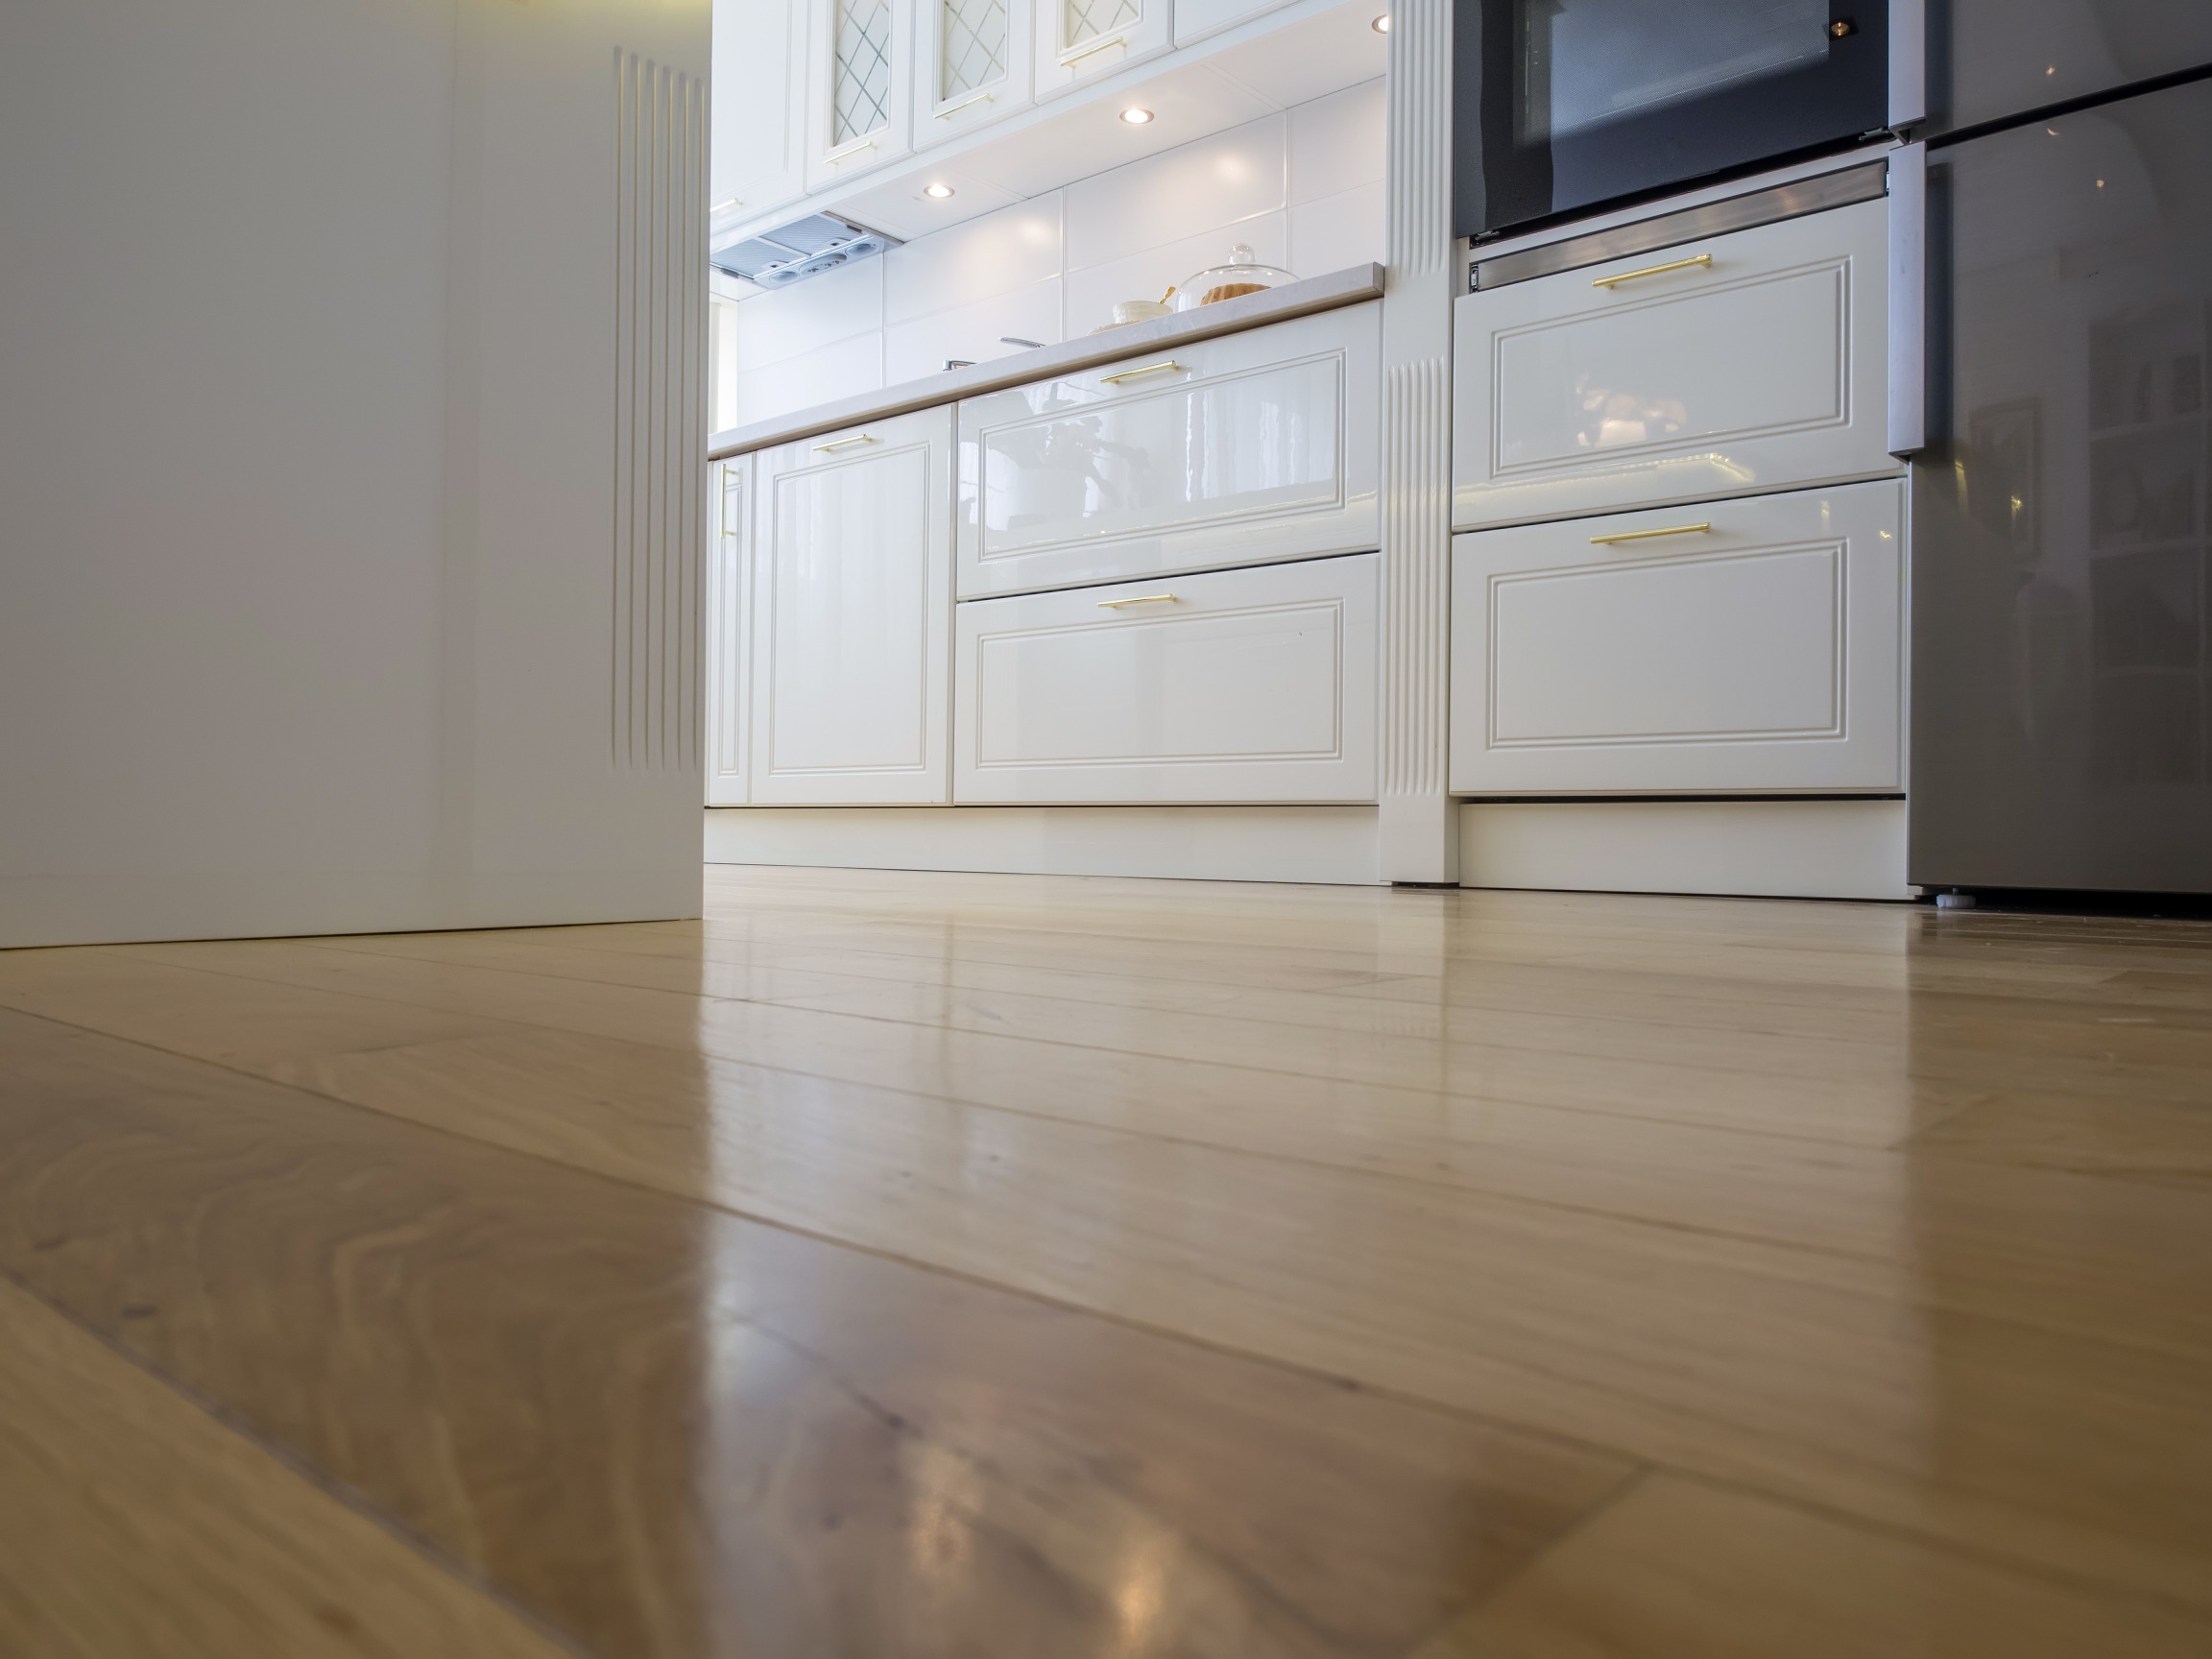 Hardwood flooring color and stain options for your Tucson, AZ home